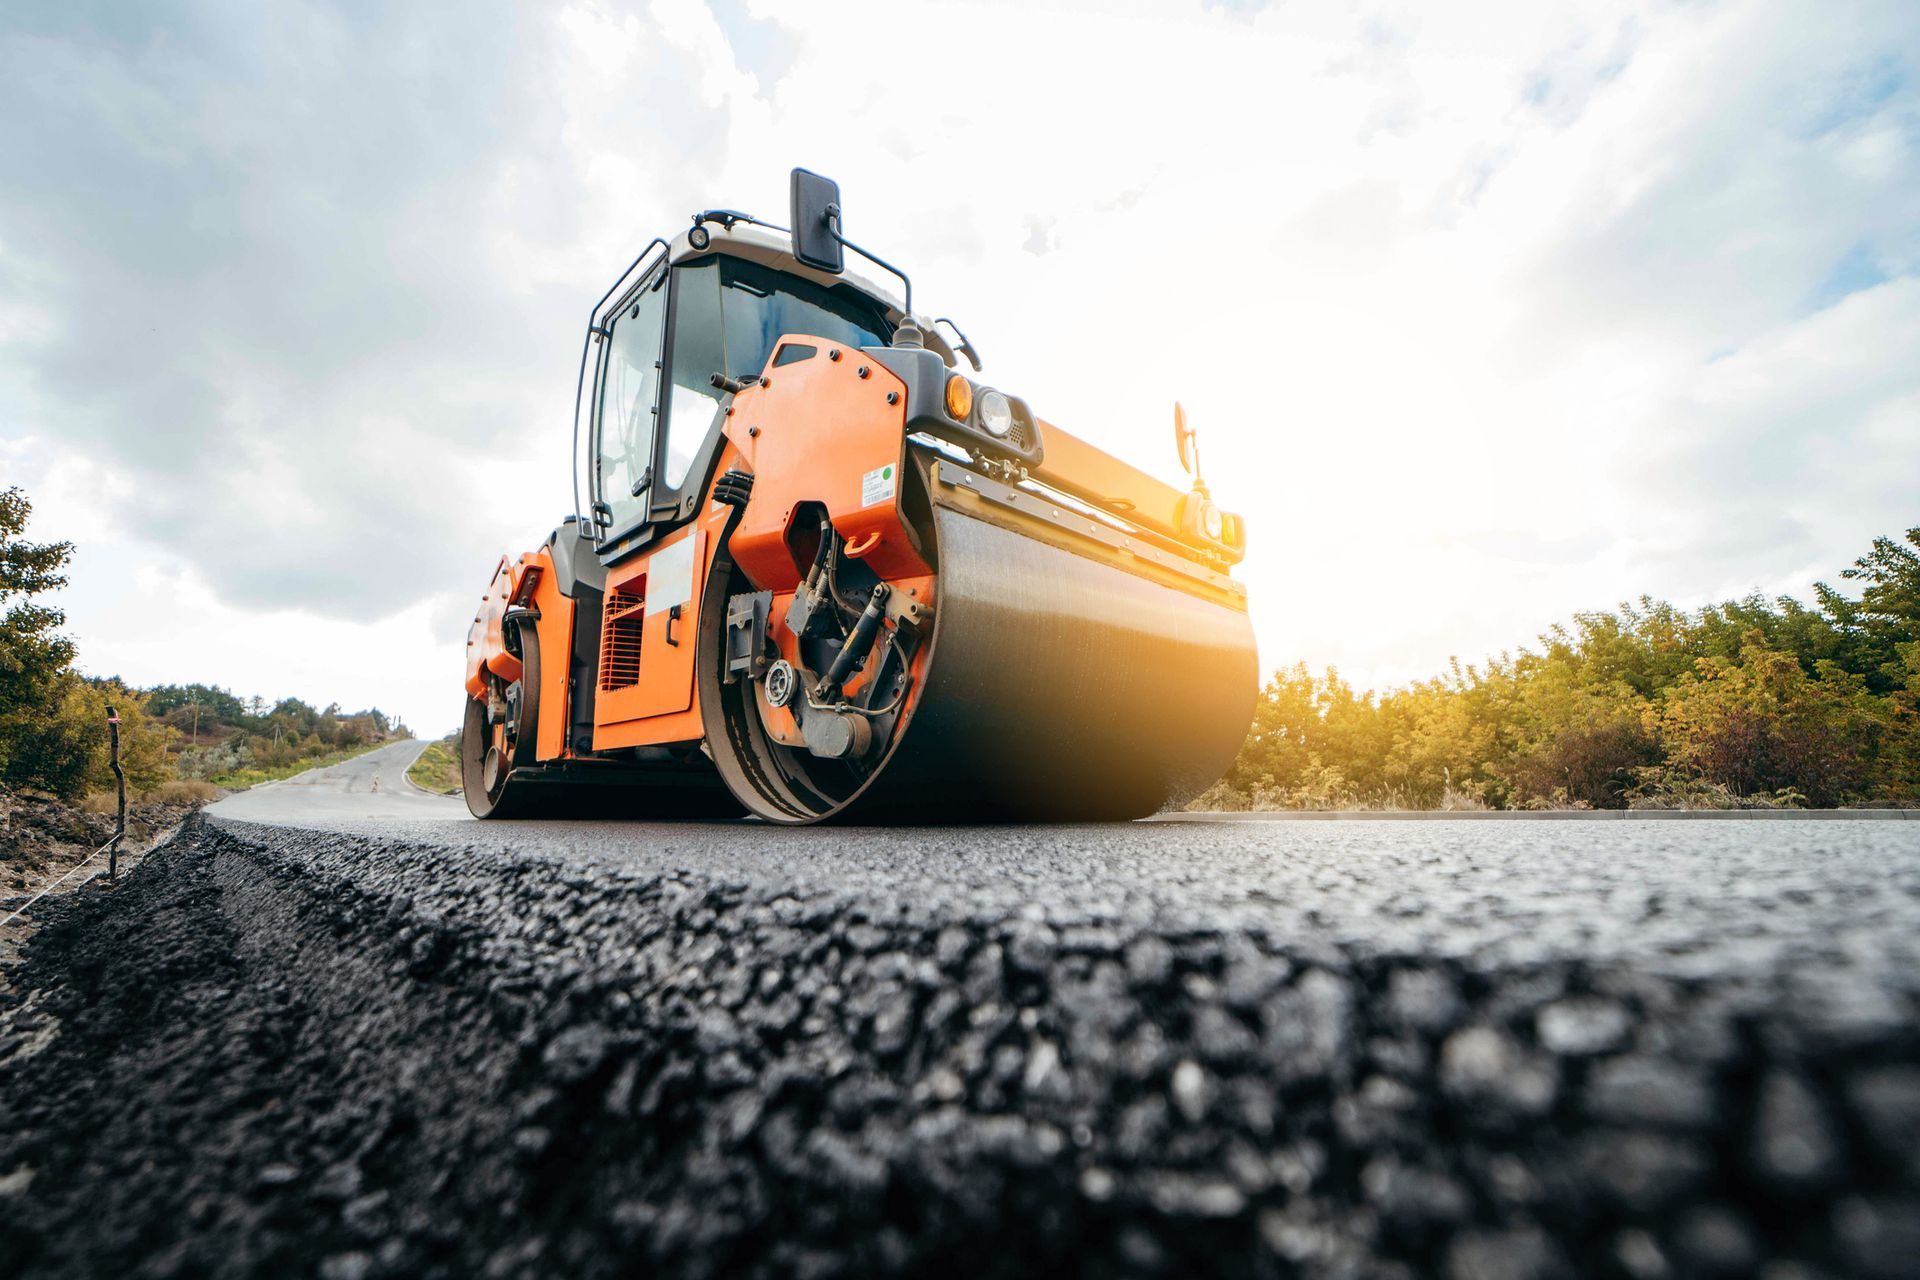 Picture of a large commercial Roller flattening a asphalt surface. You can see a yellow rolller making asphalt road flat.